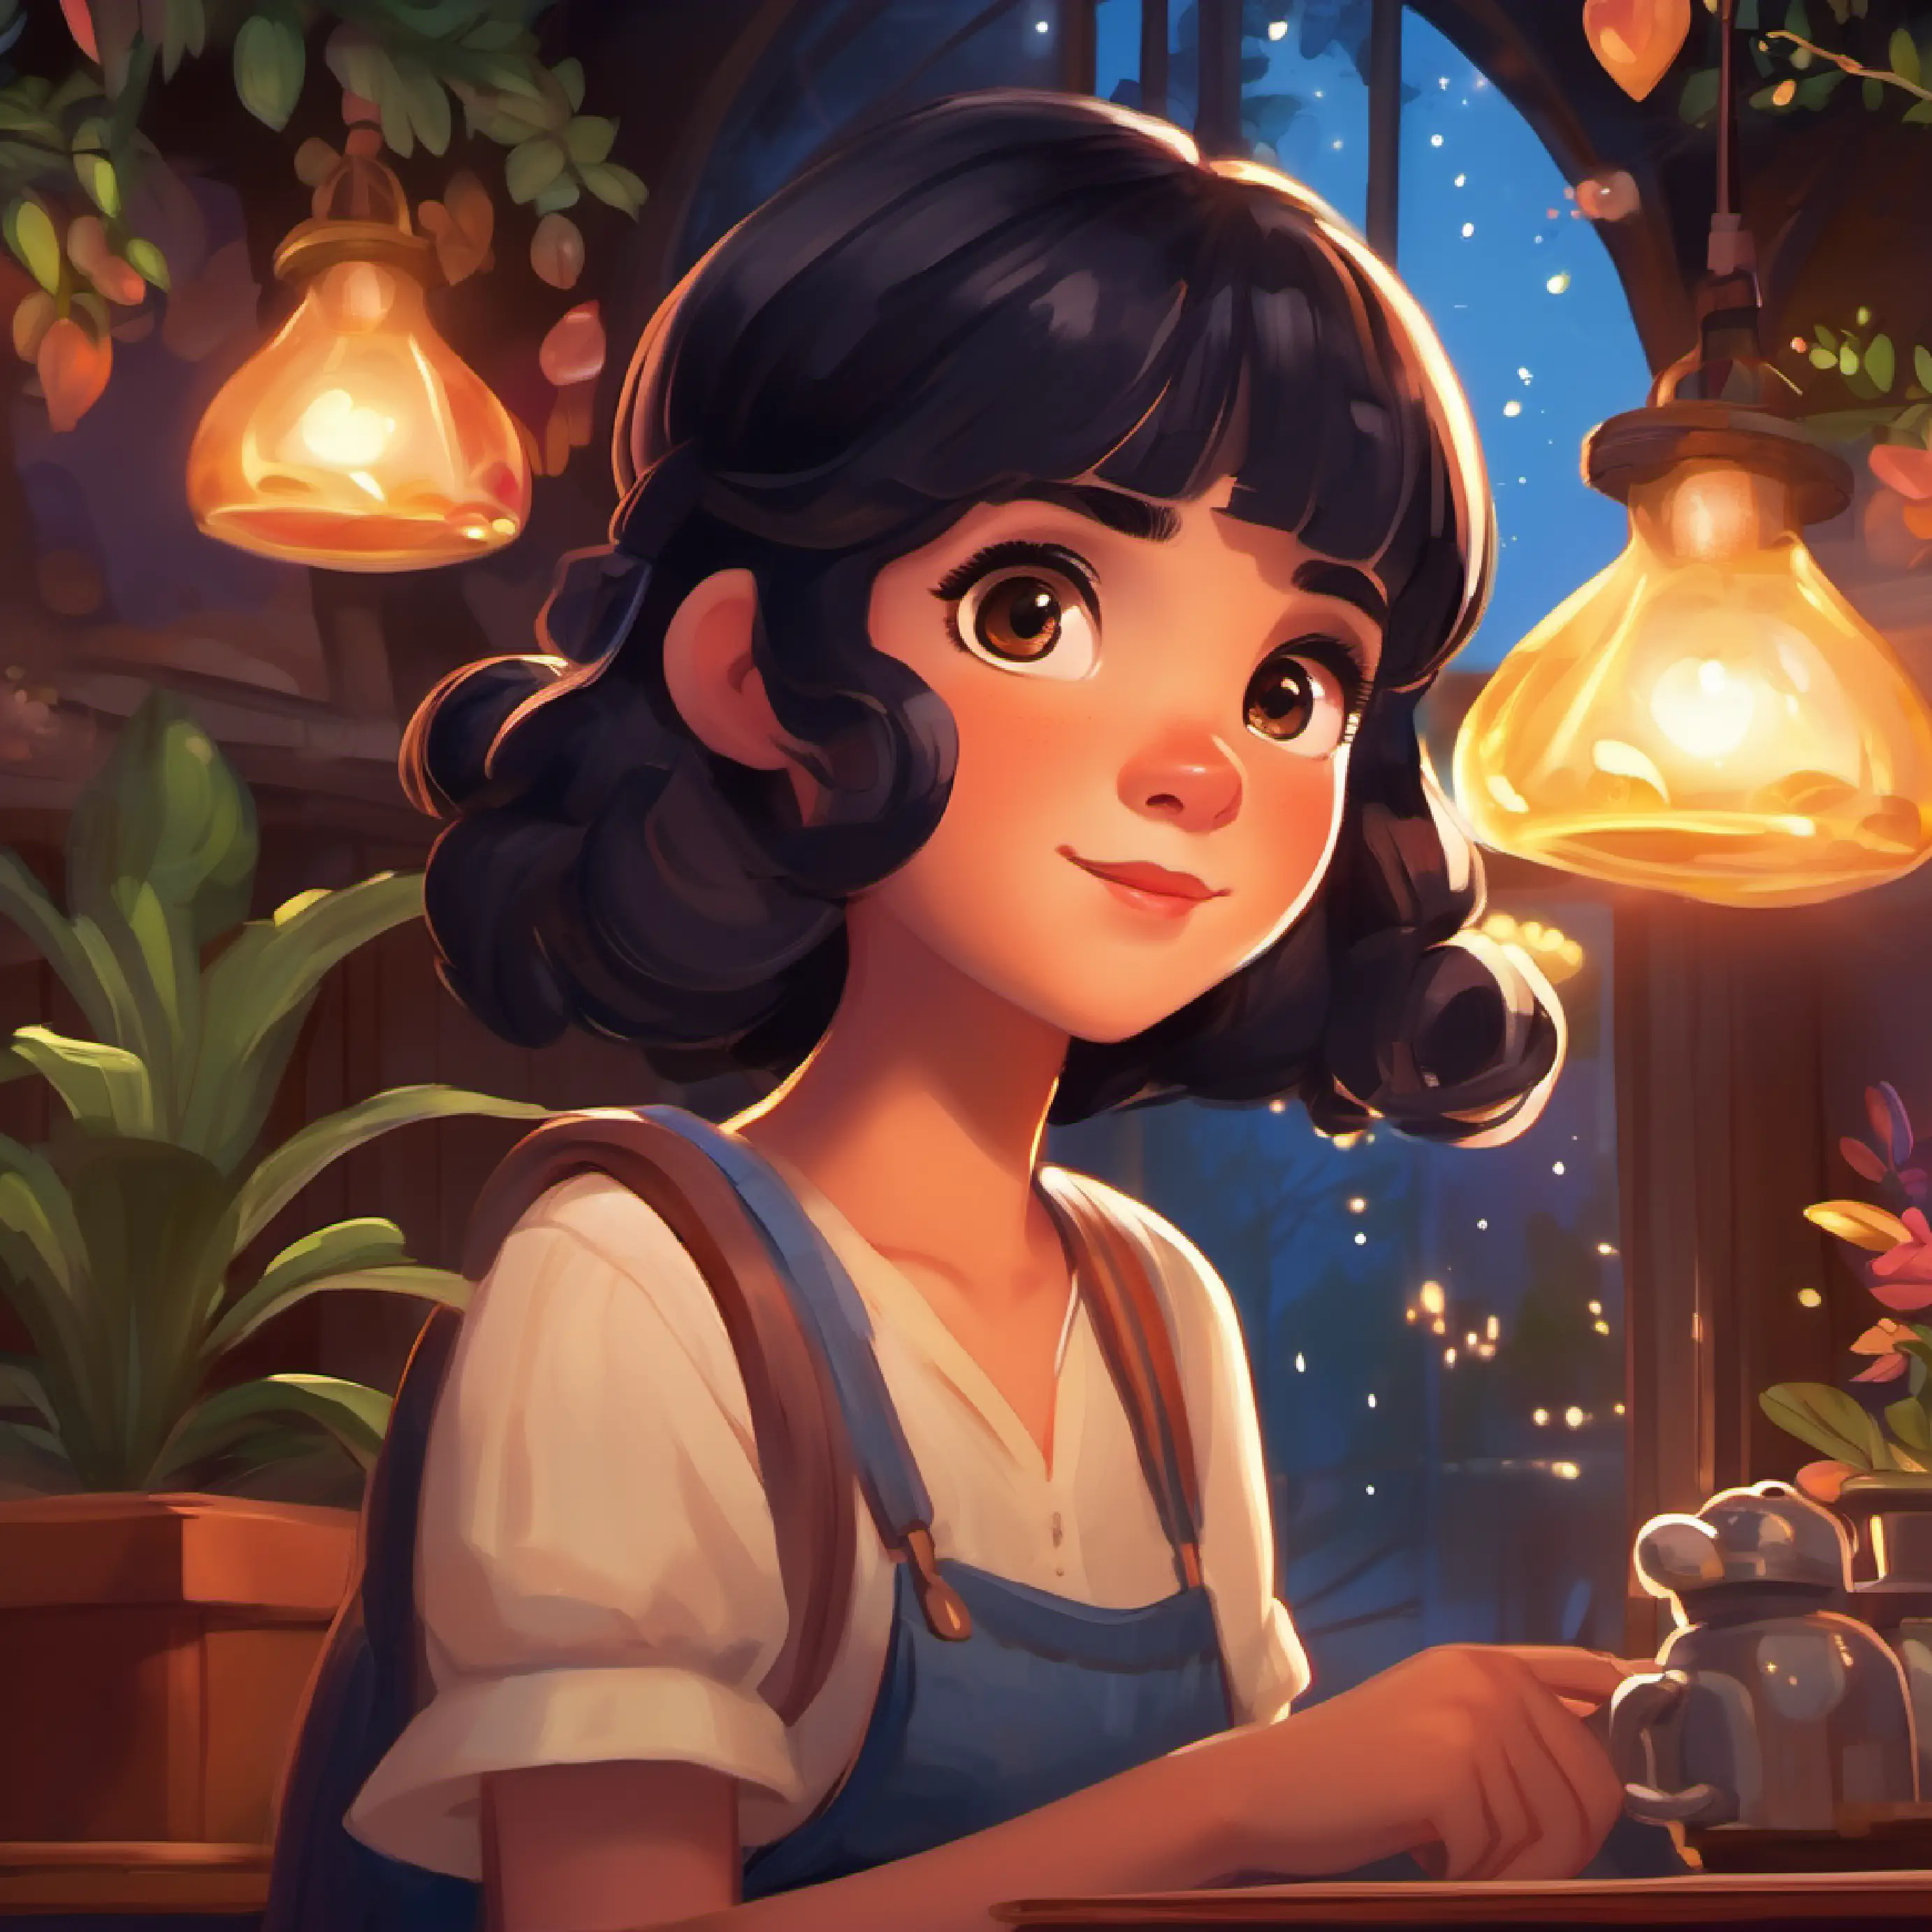 Introduction to Curious girl, midnight hair, bright, sparkling eyes and Digitville, cozy and curious setting.